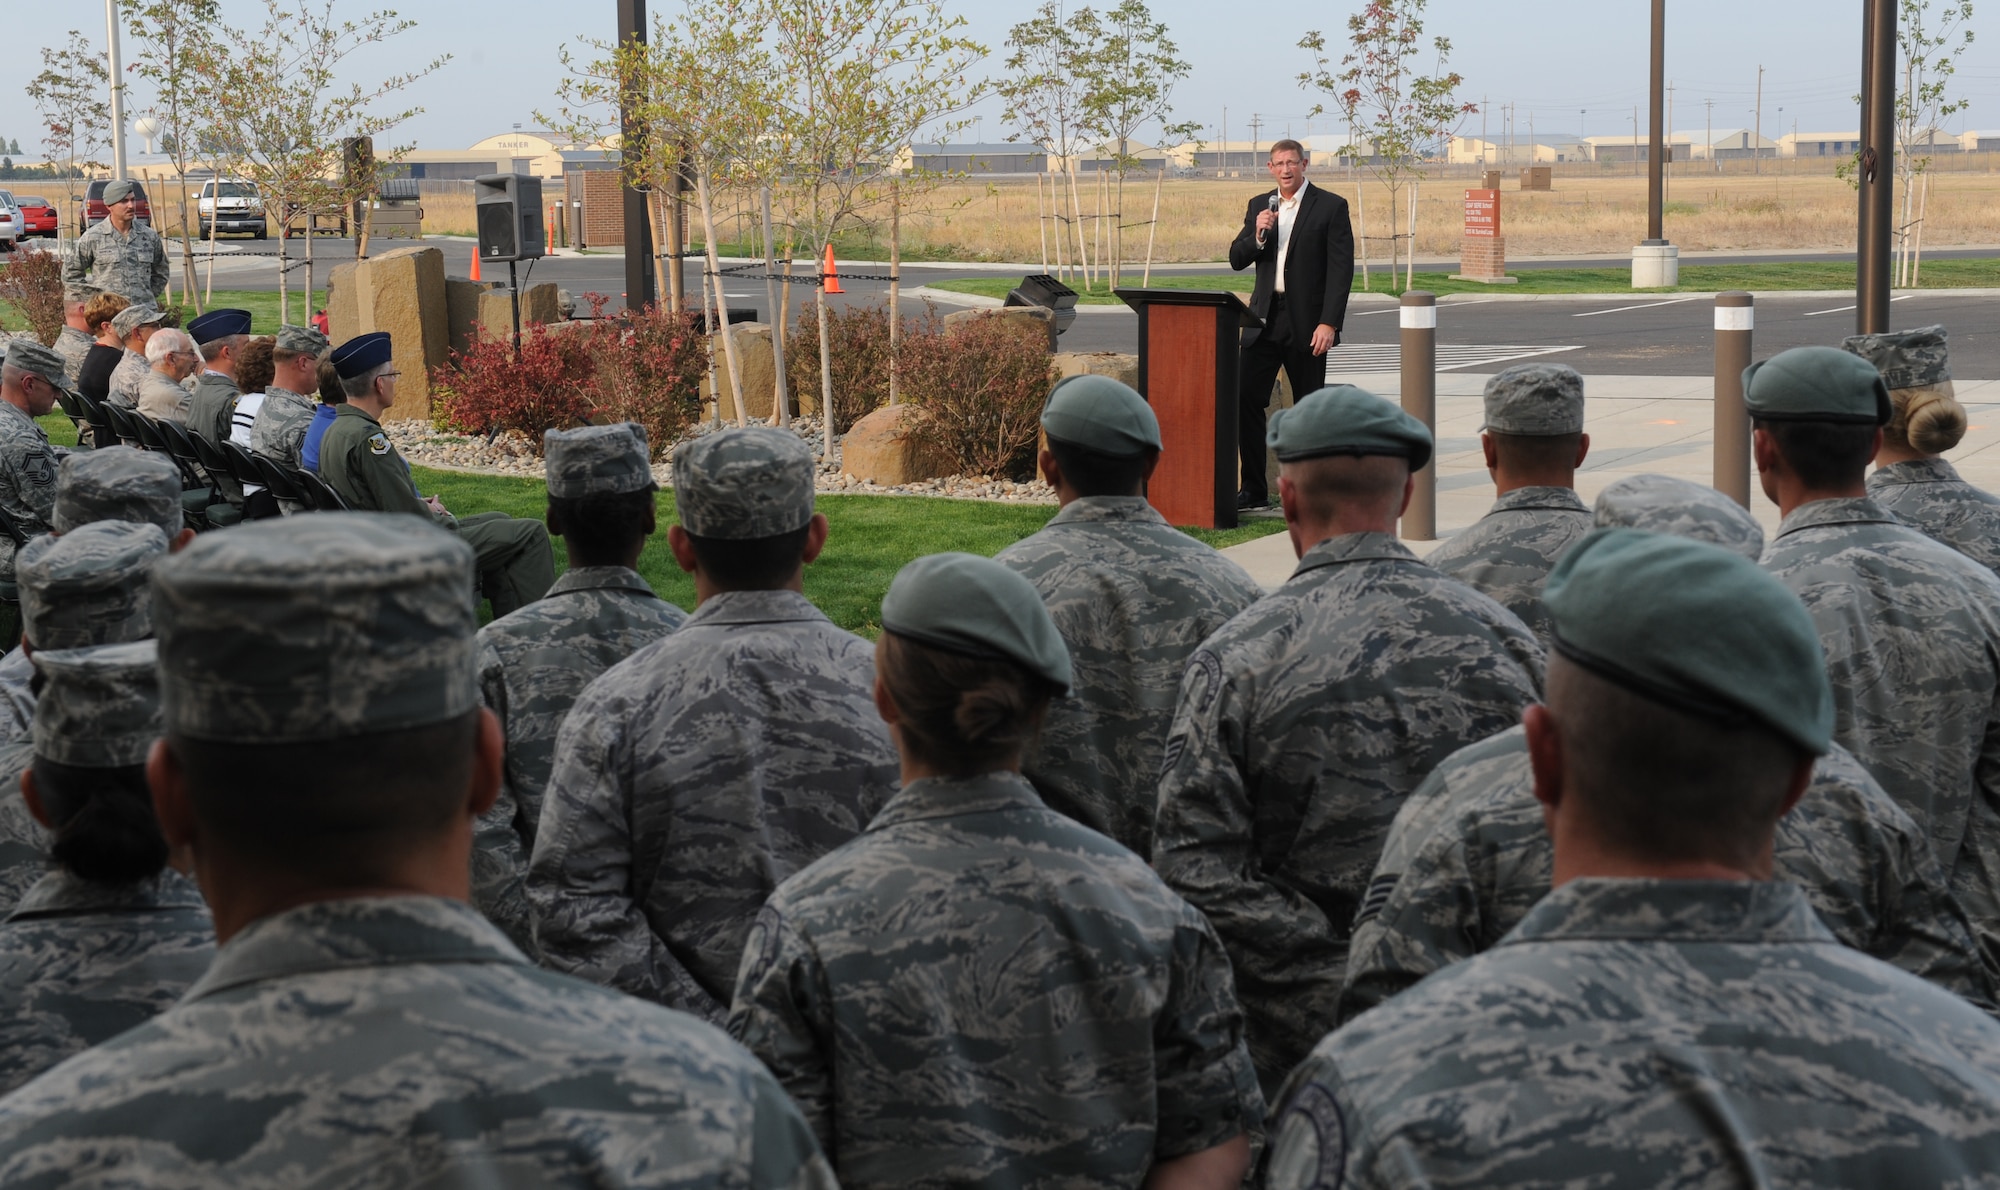 U.S. Air Force Lt. Col. (Retired) Dale Storr speaks to members of Team Fairchild during a Retreat Ceremony honoring prisoners of war and those missing in action at Fairchild Air Force Base, Wash. Sept. 21, 2012. Storr was tortured and held captive for 33 days by Iraqi forces after being shot down over Kuwait during Operation Desert Storm in 1991. (U.S. Air Force photo by Staff Sgt. Michael Means)